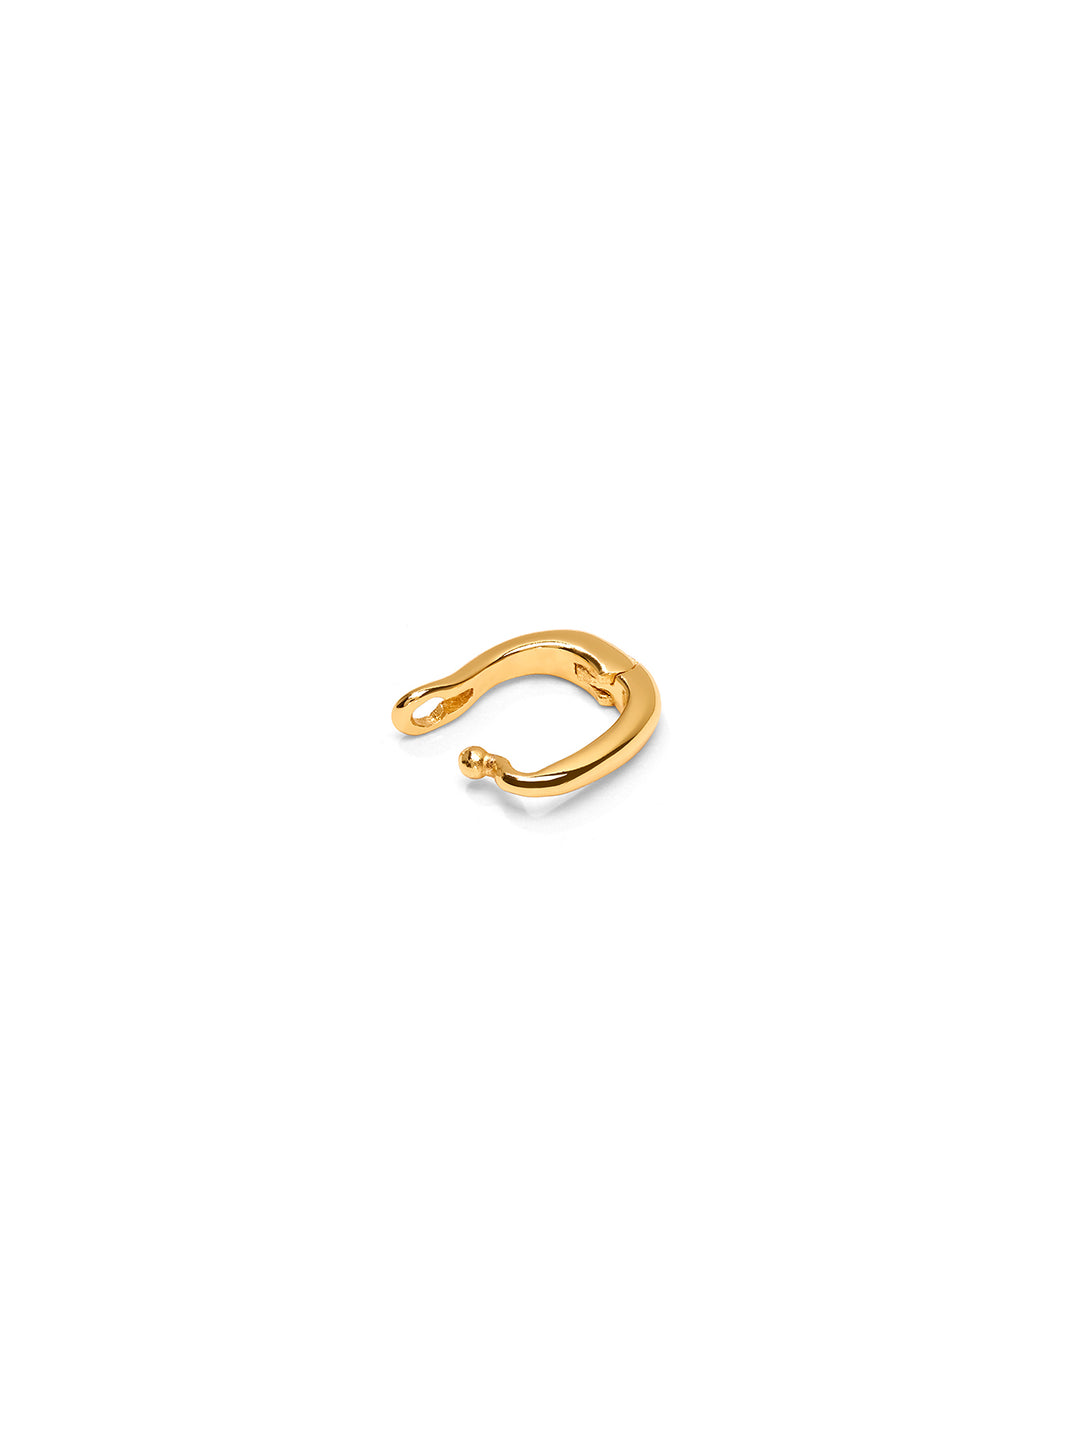 Clasp • Color: 18K Yellow Gold